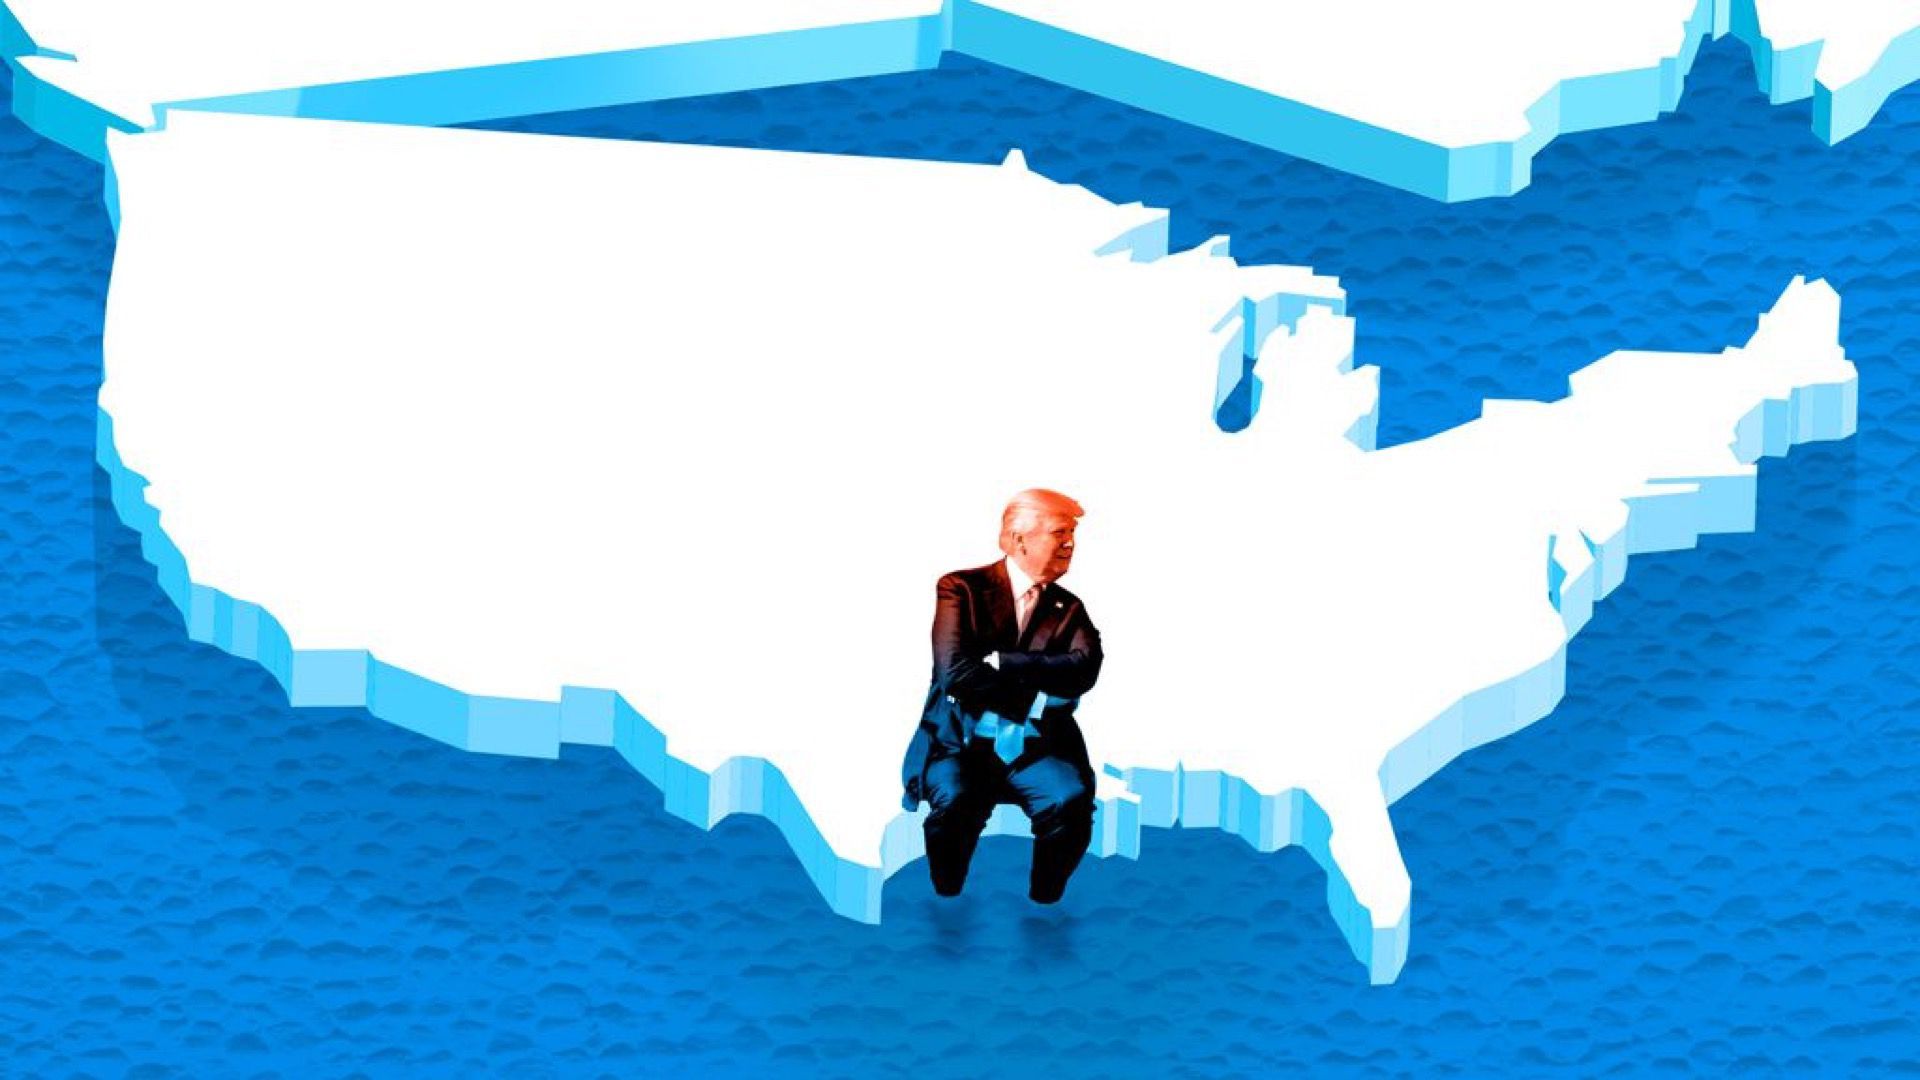 Image of President Trump sitting on a ice cutout of the United States pulling away from Canada